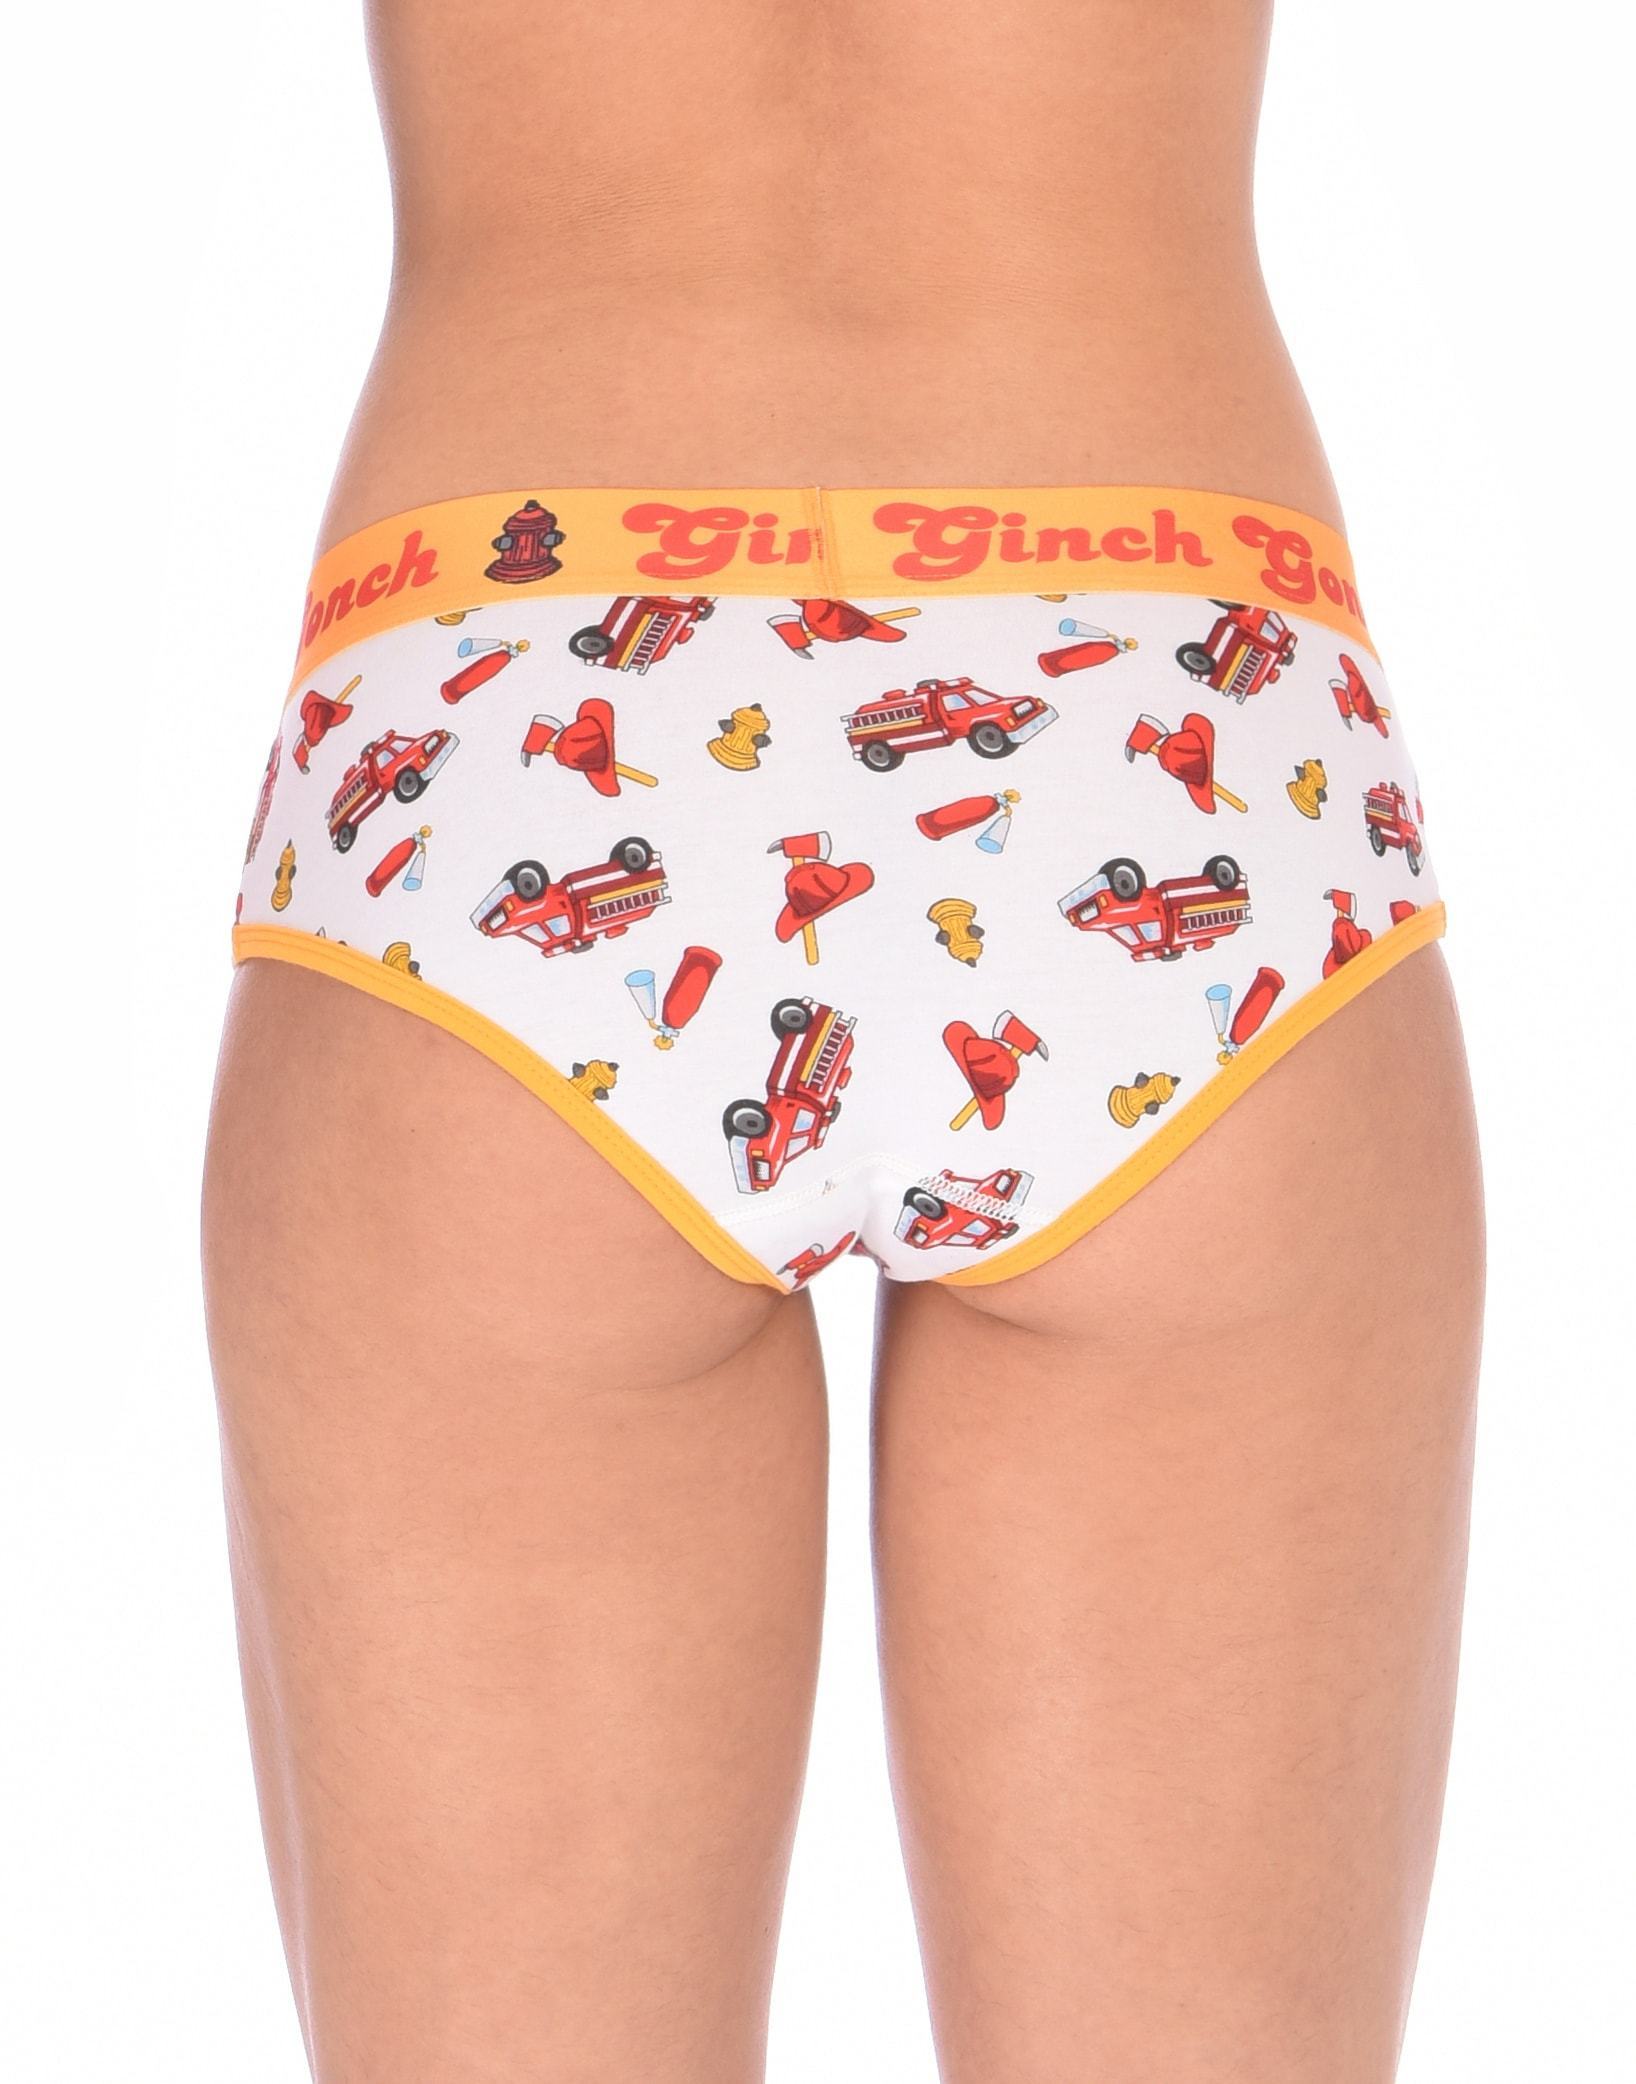 Ginch Gonch GG Fire Fighters boy cut Brief womens y front underwear white fabric with fire engines hats and hydrants, yellow trim and yellow printed waistband back